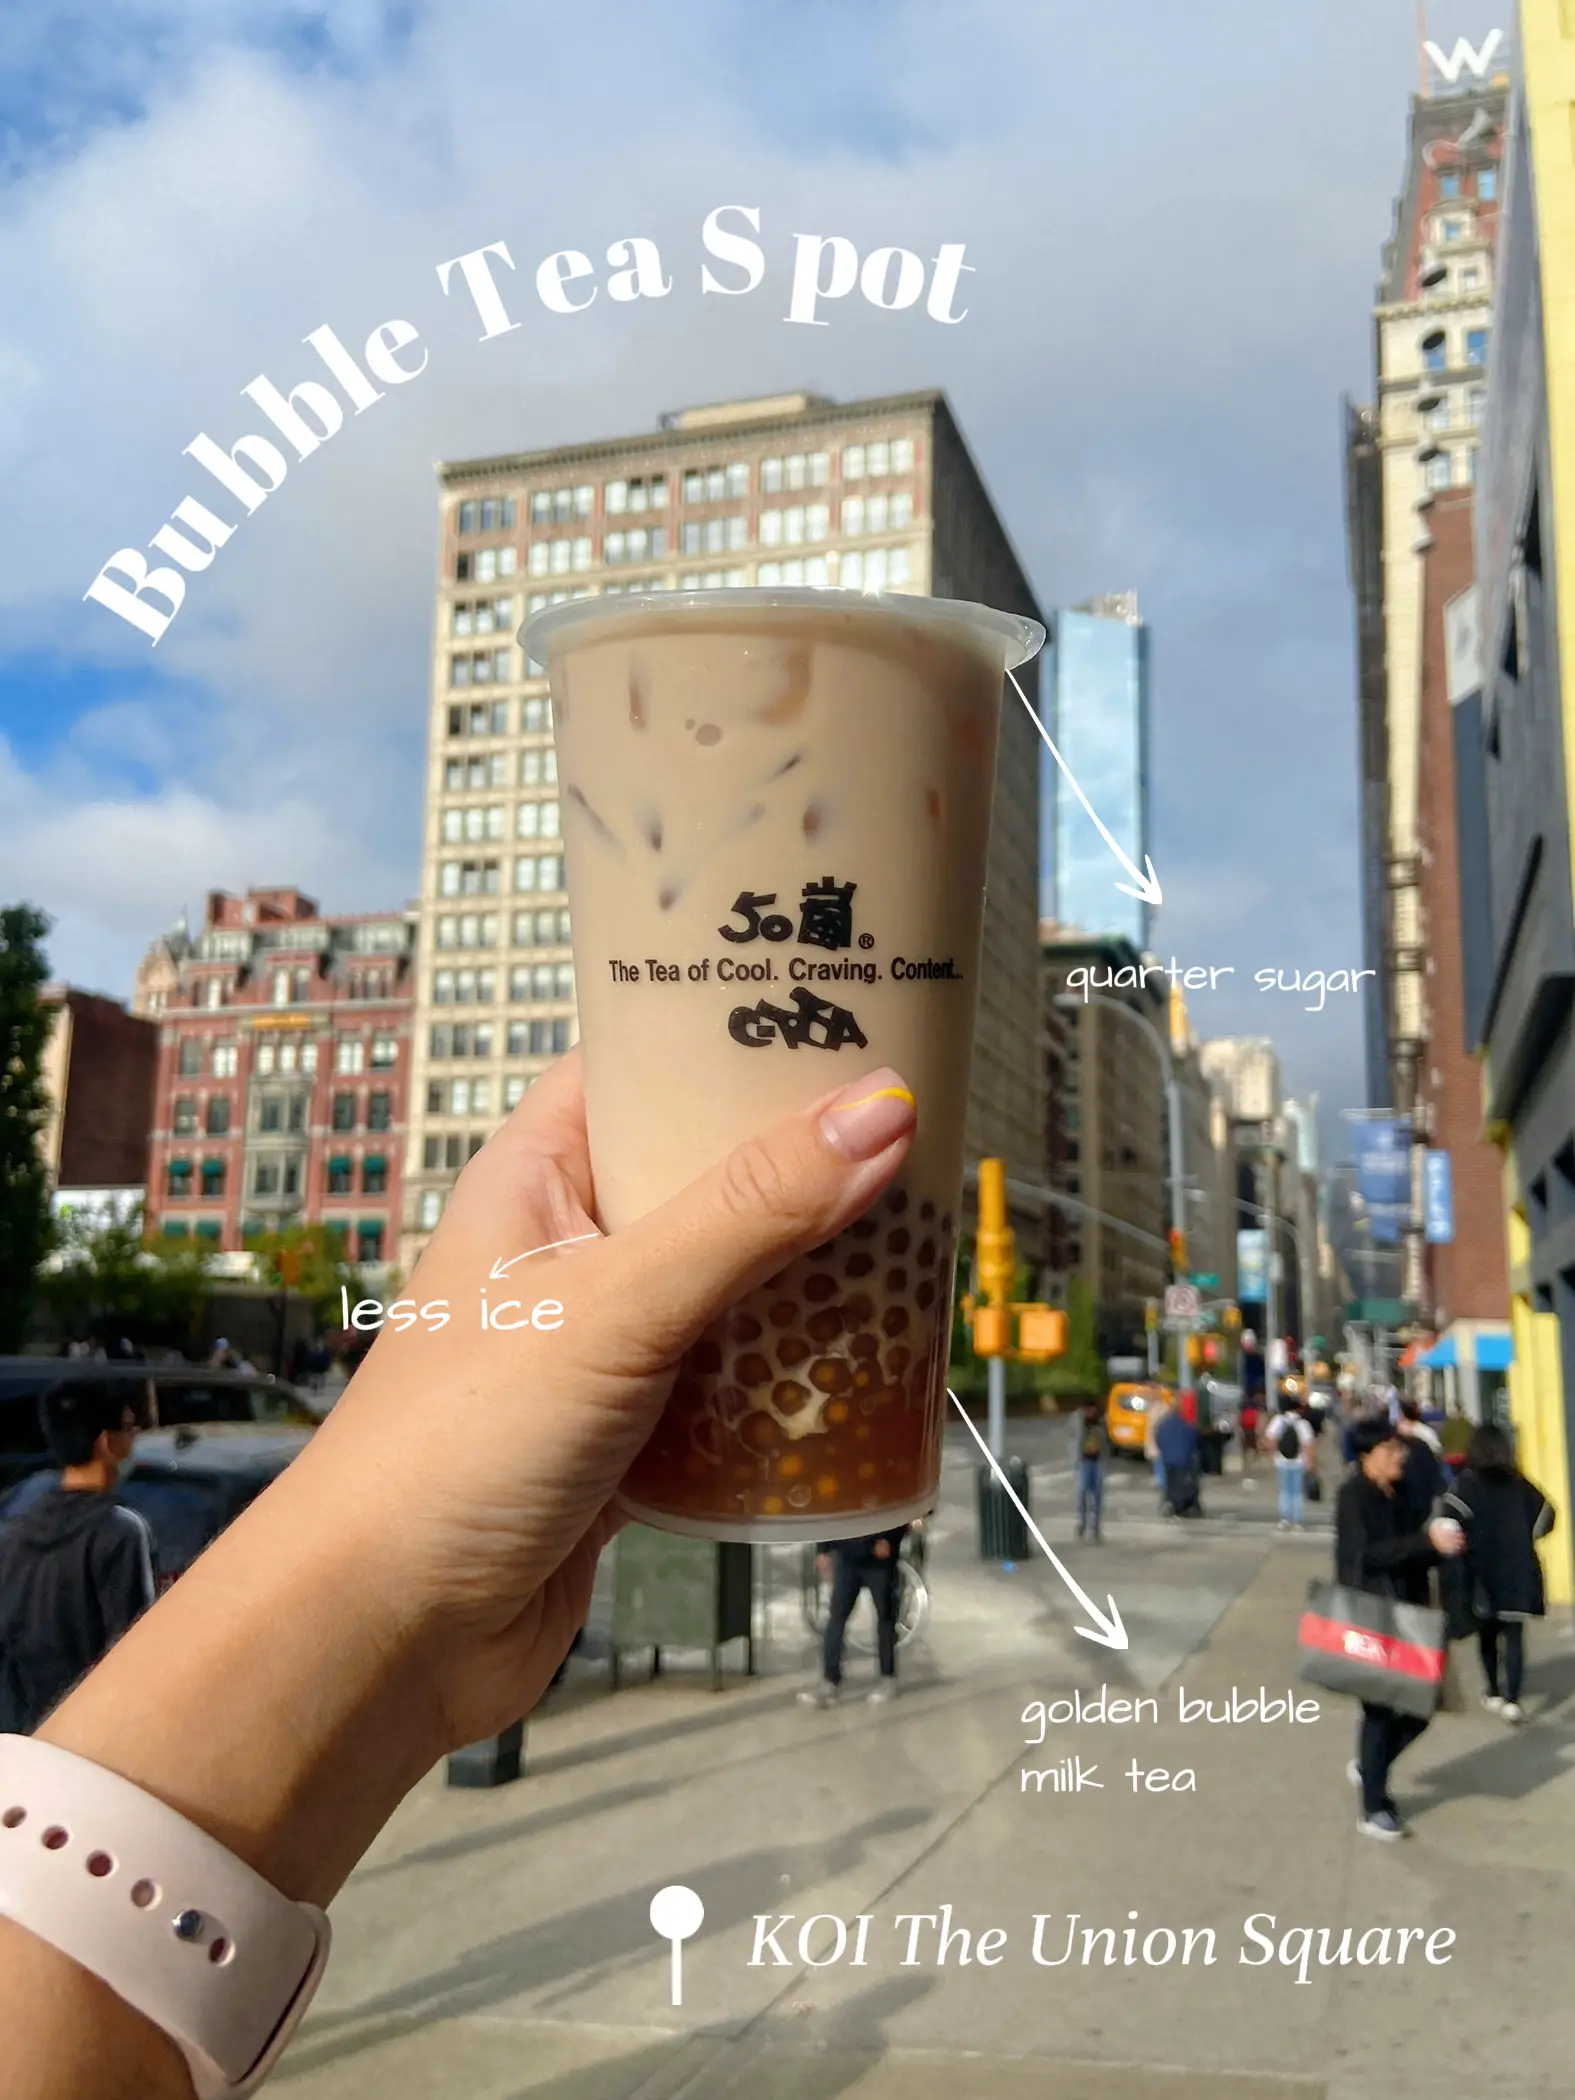 One of my fav bubble tea spots in NYC's images